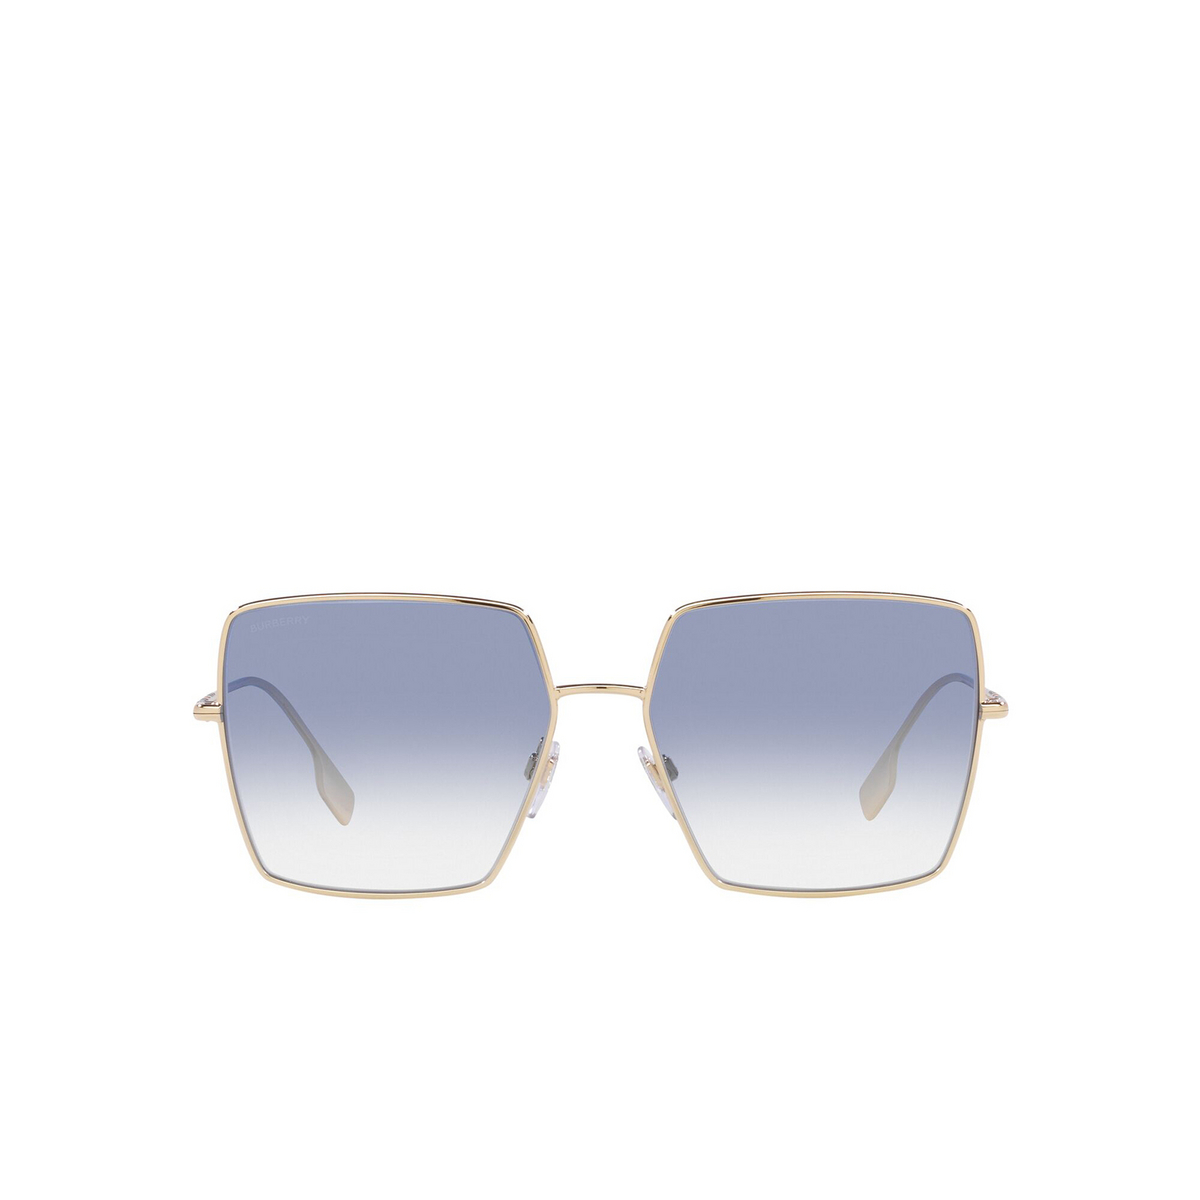 Burberry® Square Sunglasses: BE3133 Daphne color 110919 Light Gold - front view